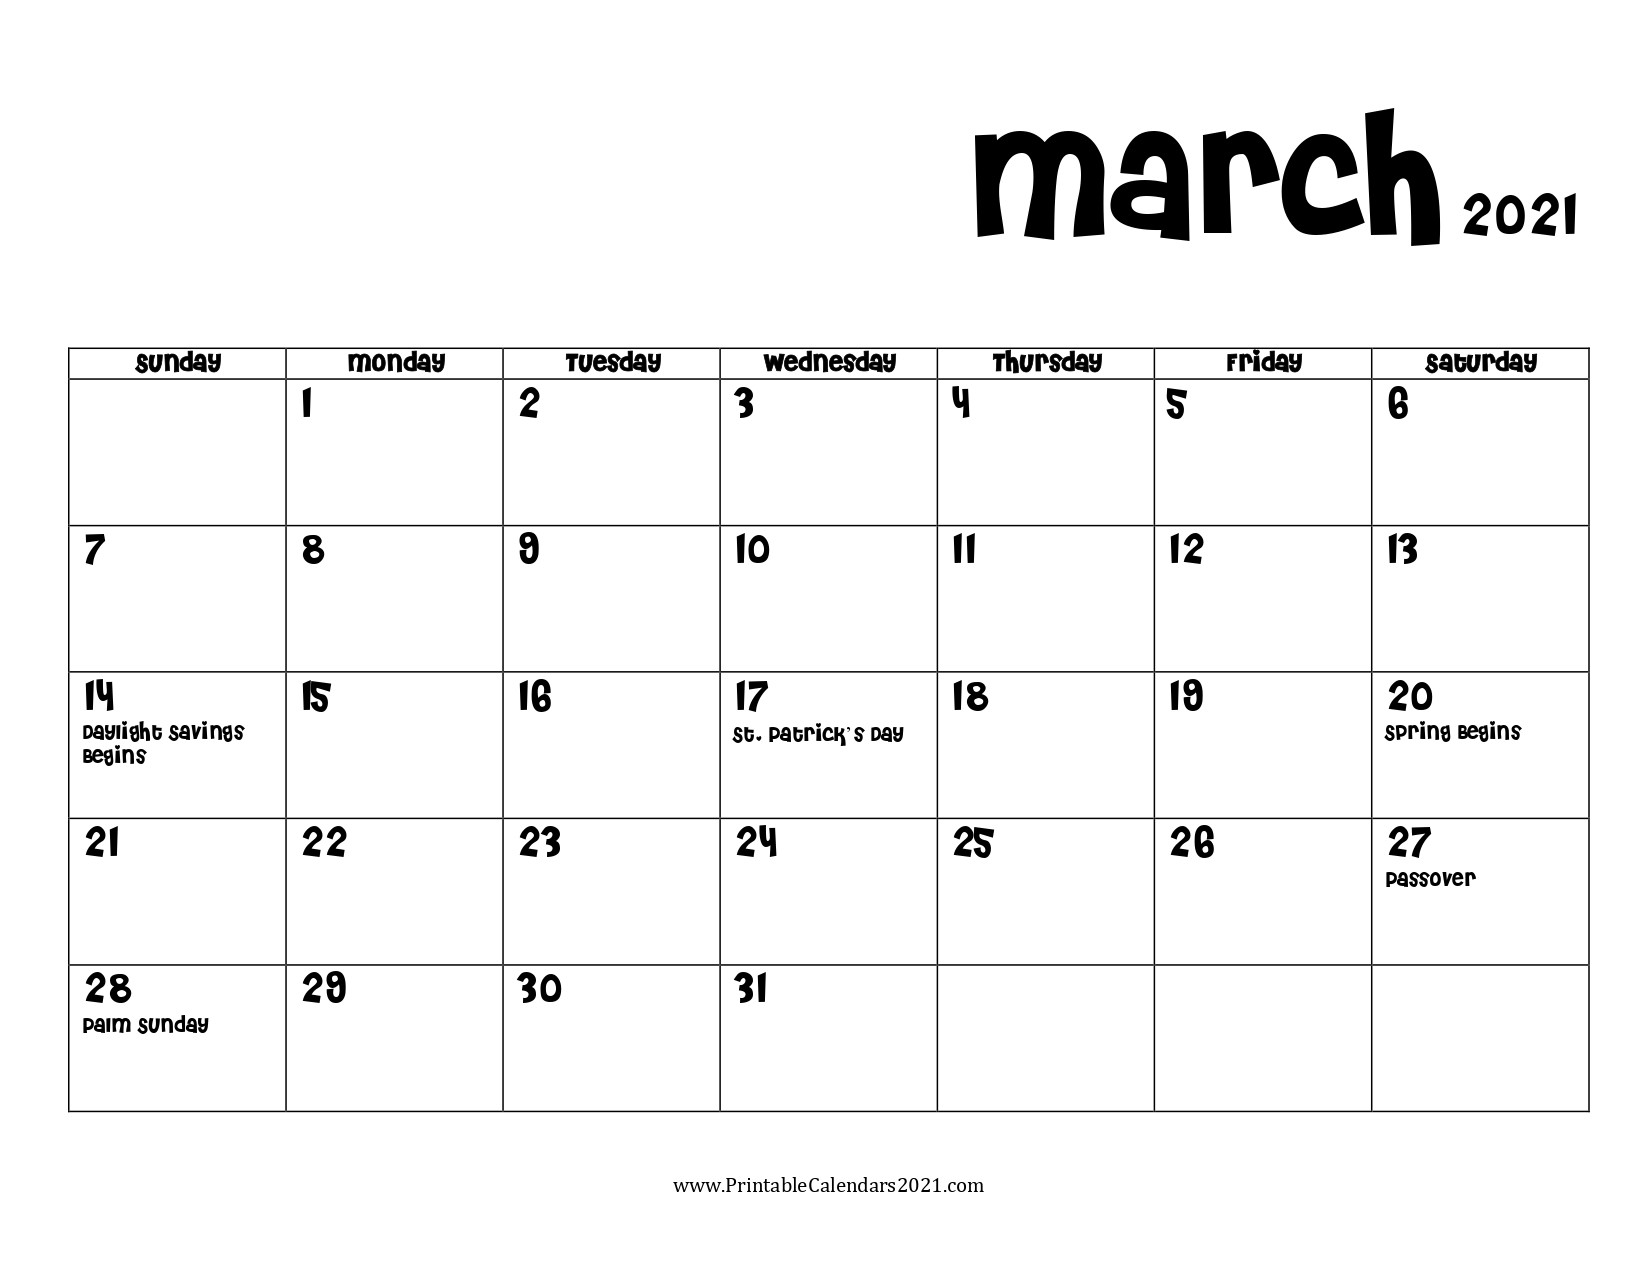 68 Free March 2021 Calendar Printable with Holidays